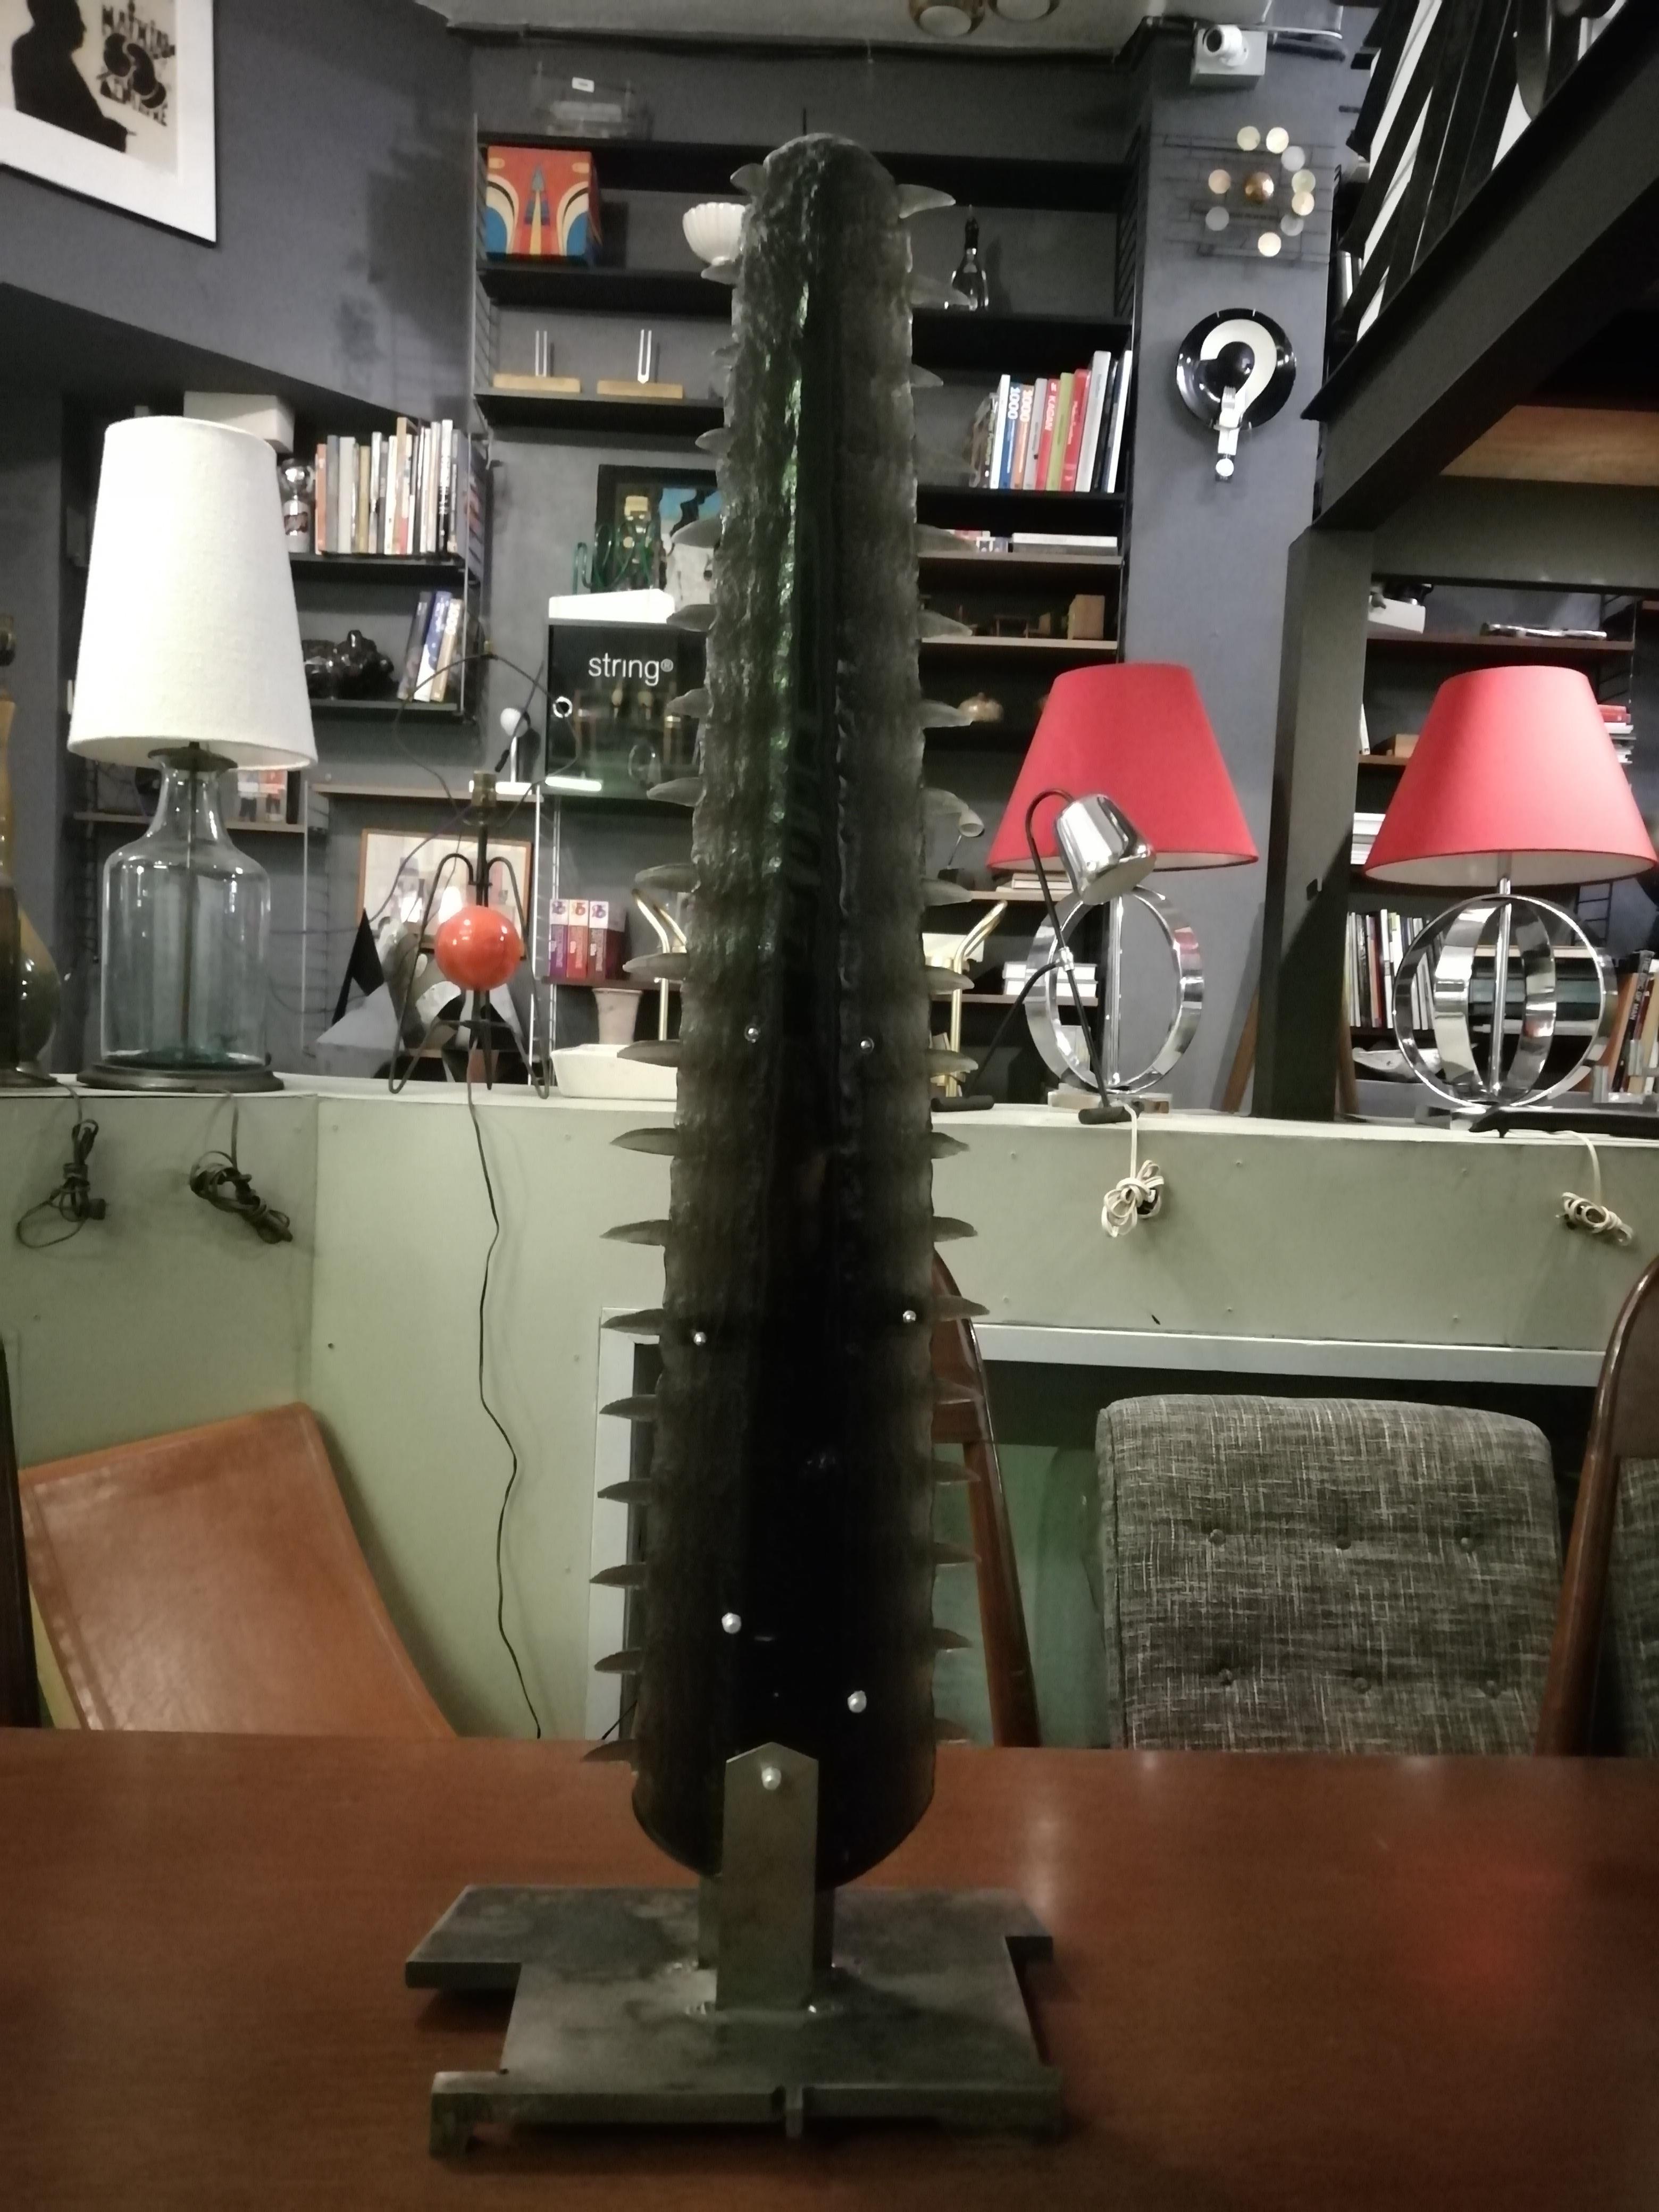 An unusual dark resin sculpture in the shape of a sawfish rostrum by Mexican artist Viktor Martínez. The piece is mounted on an Industrial style steel base.